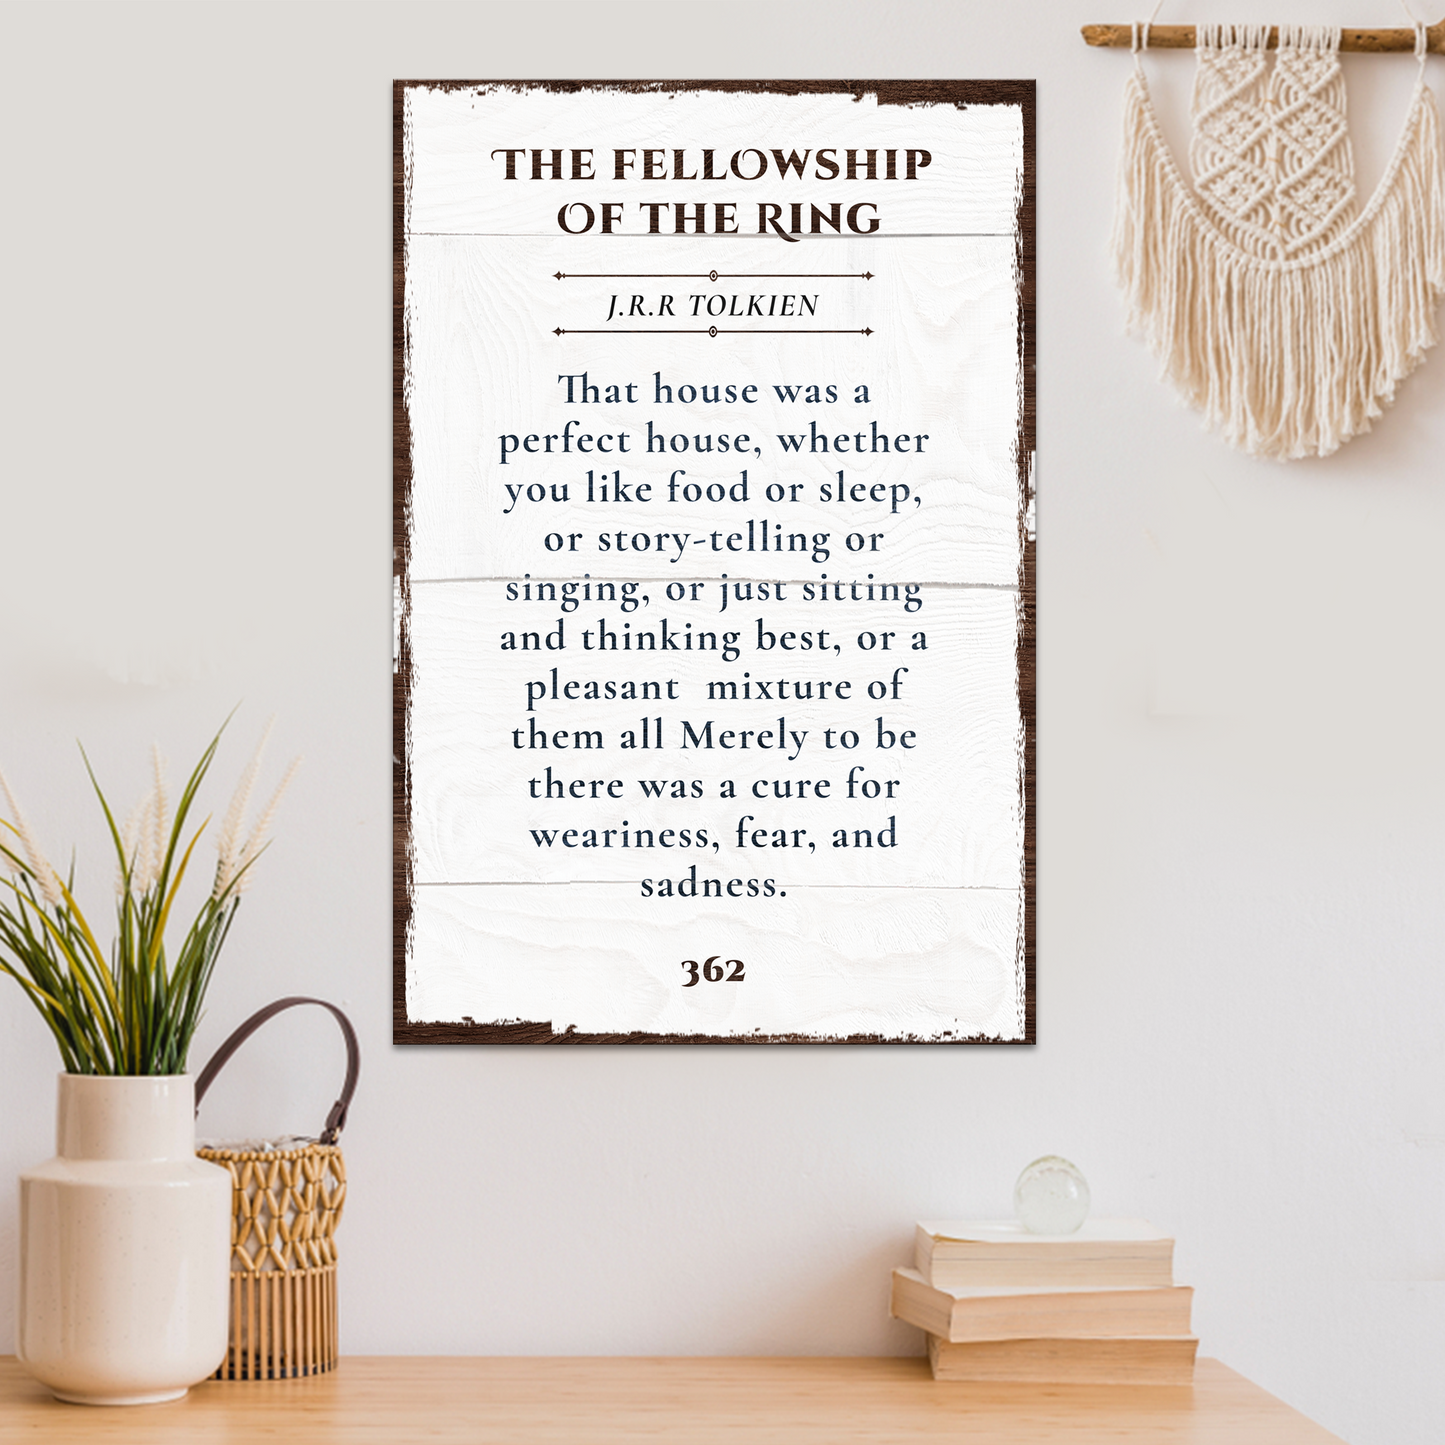 Fellowship of the Ring Sign - Image by Tailored Canvases